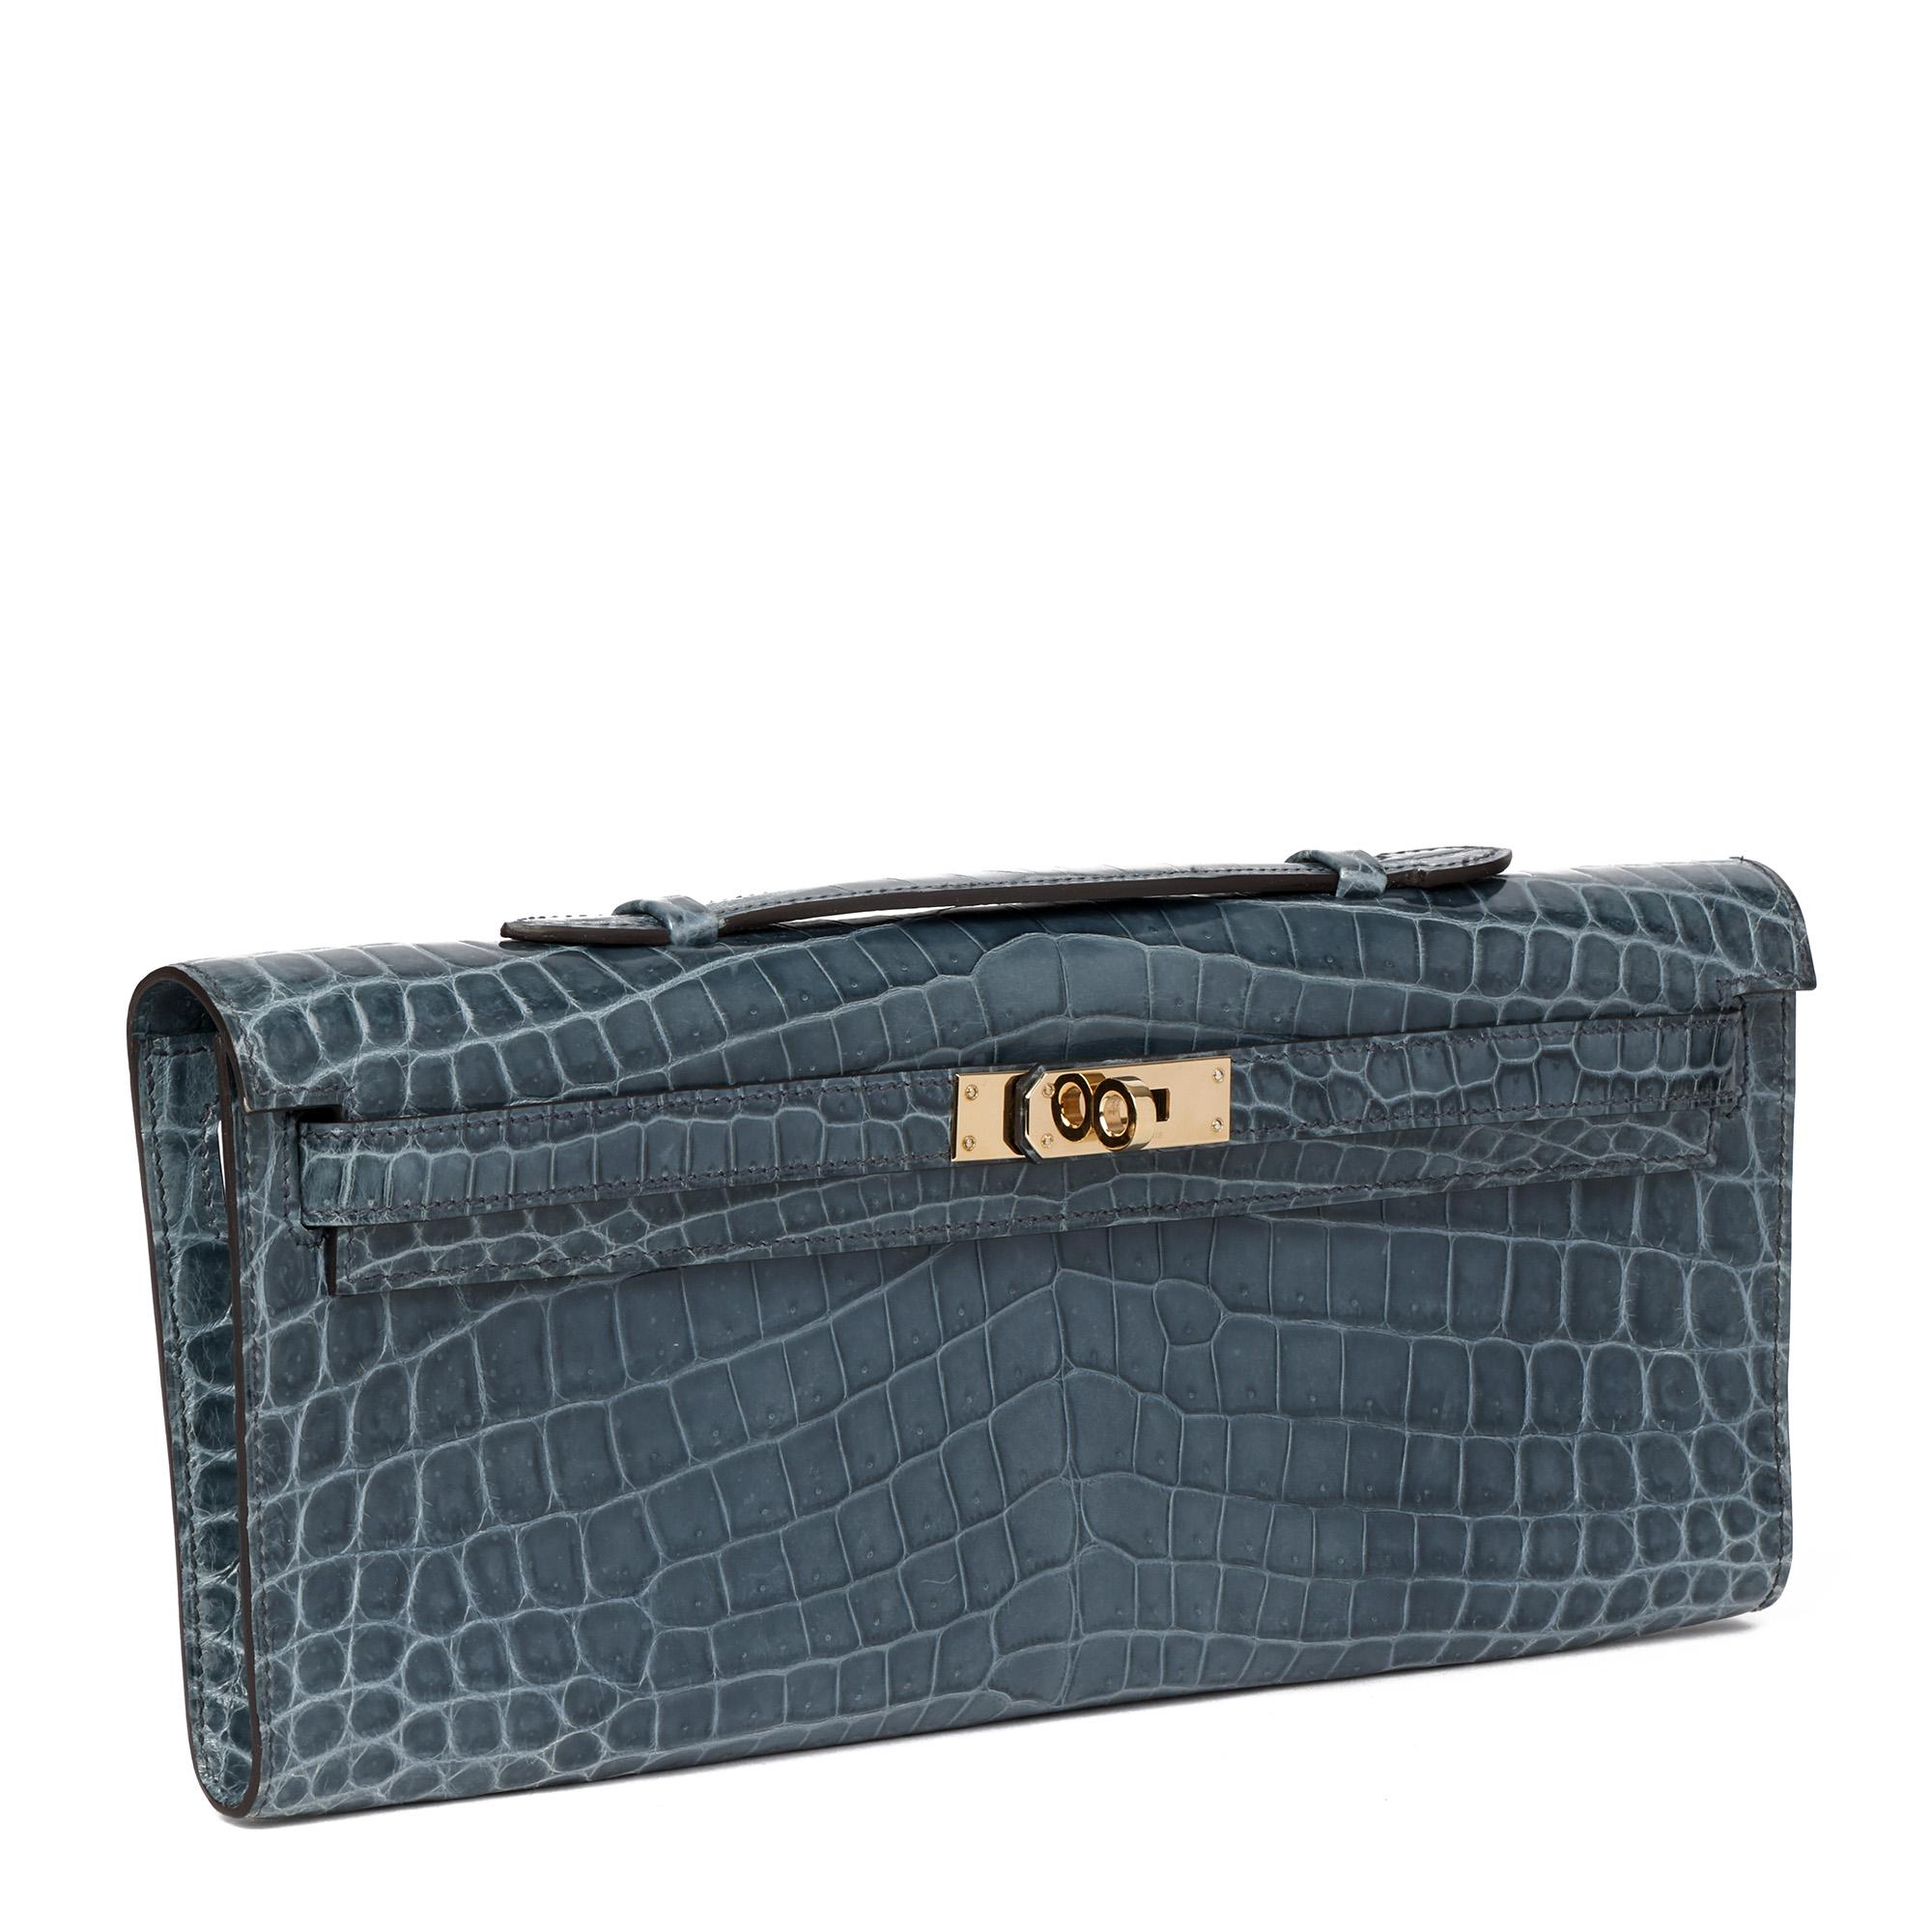 HERMÈS
Blue Tempete Shiny Niloticus Crocodile Leather Kelly Cut

Xupes Reference: CB386
Serial Number: [Q]
Age (Circa): 2013
Accompanied By: Hermès Dust Bag, Box,
Authenticity Details: Date Stamp (Made in France)
Gender: Ladies
Type: Top Handle,